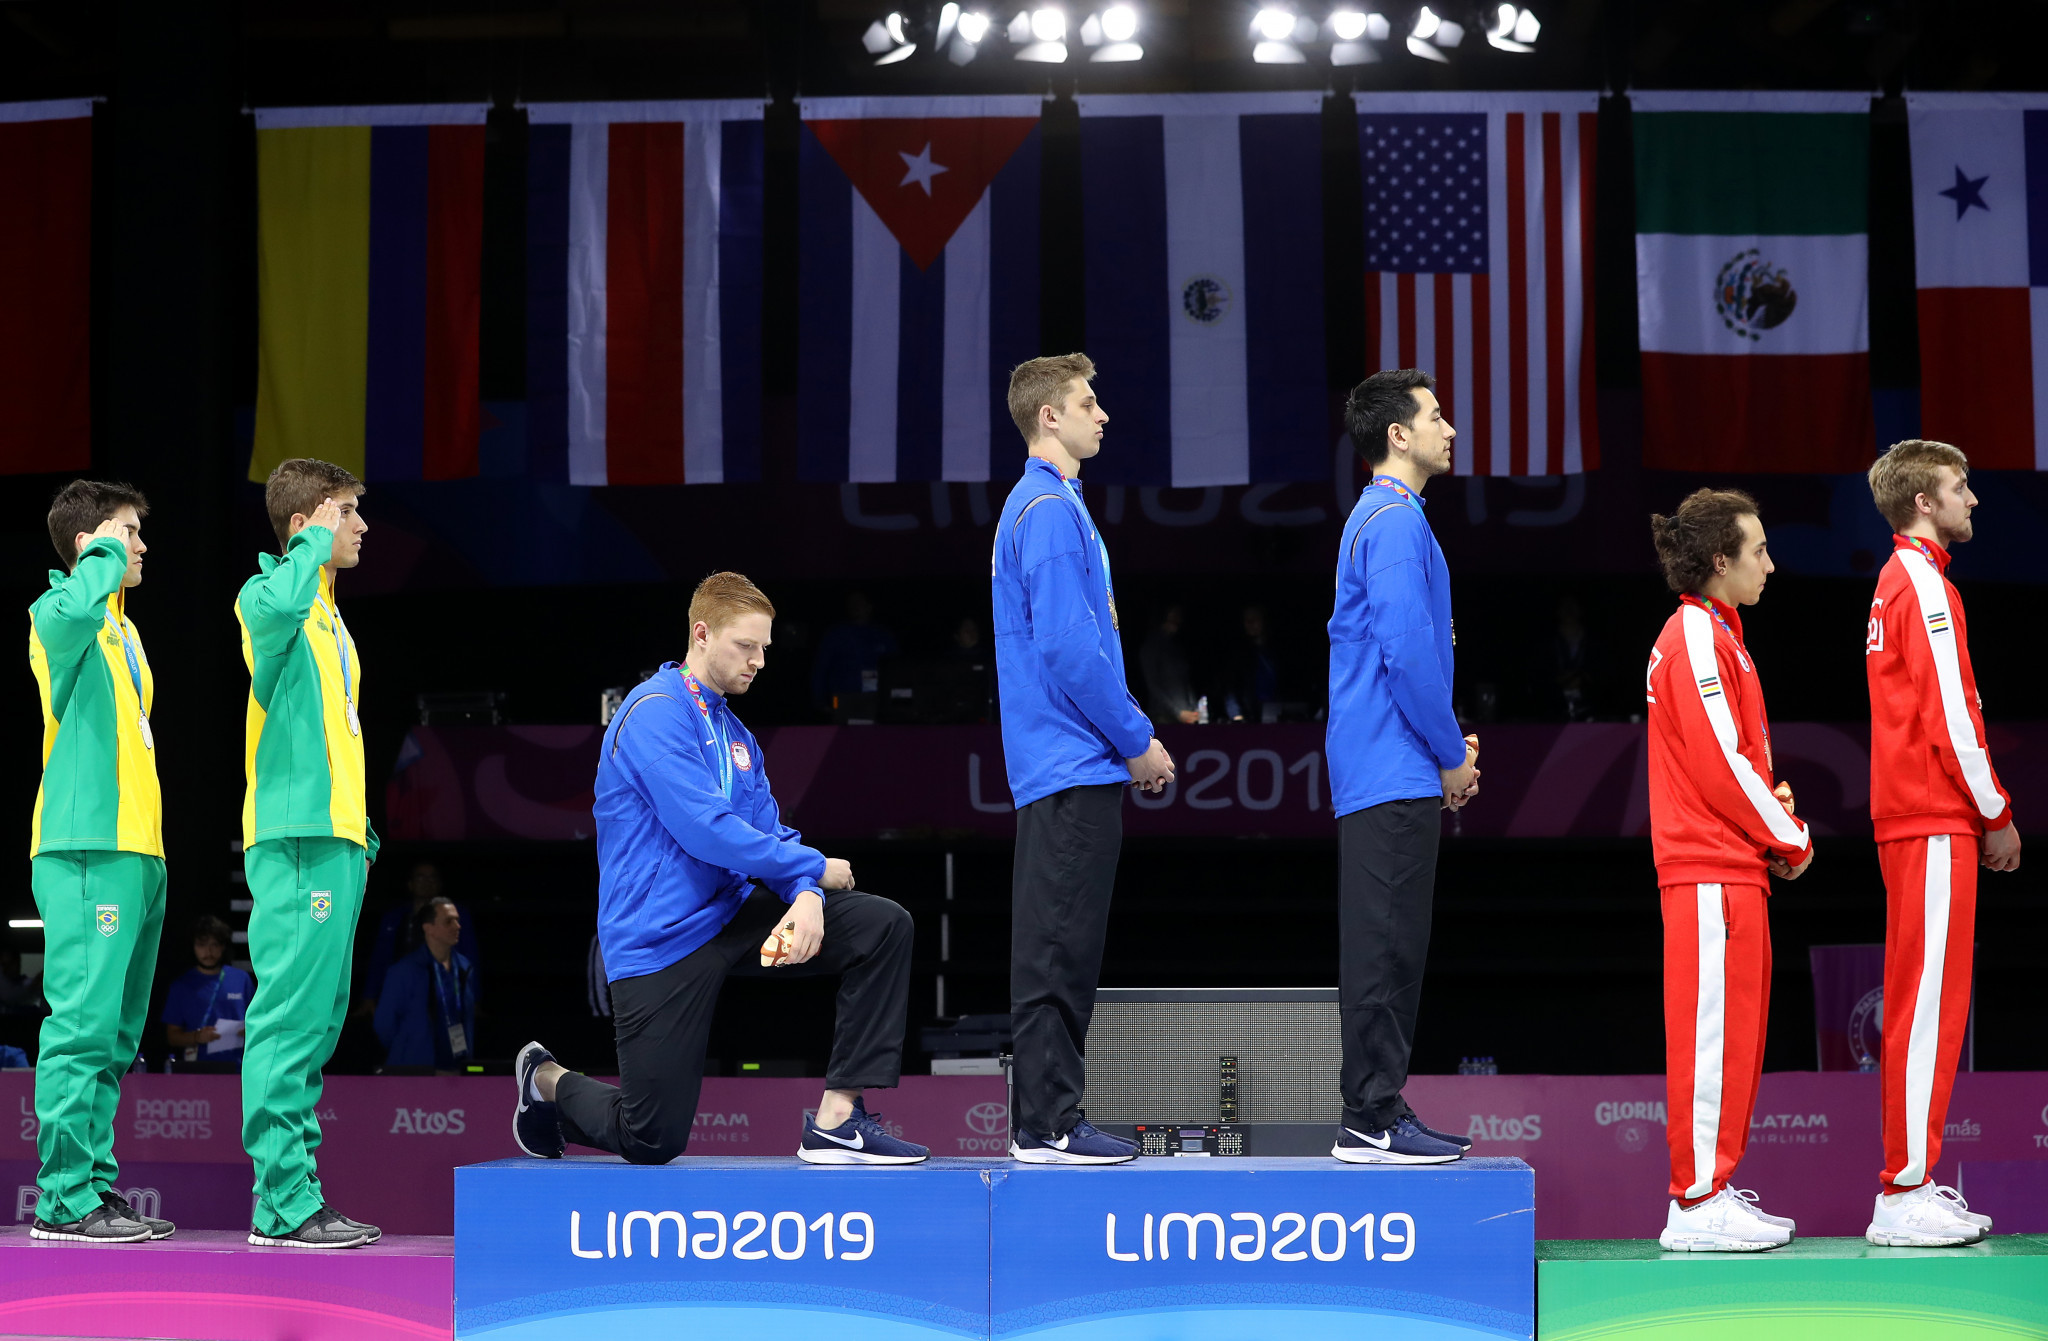 American fencer Race Imboden took a knee during the national anthem at the Lima 2019 Pan American Games ©Getty Images